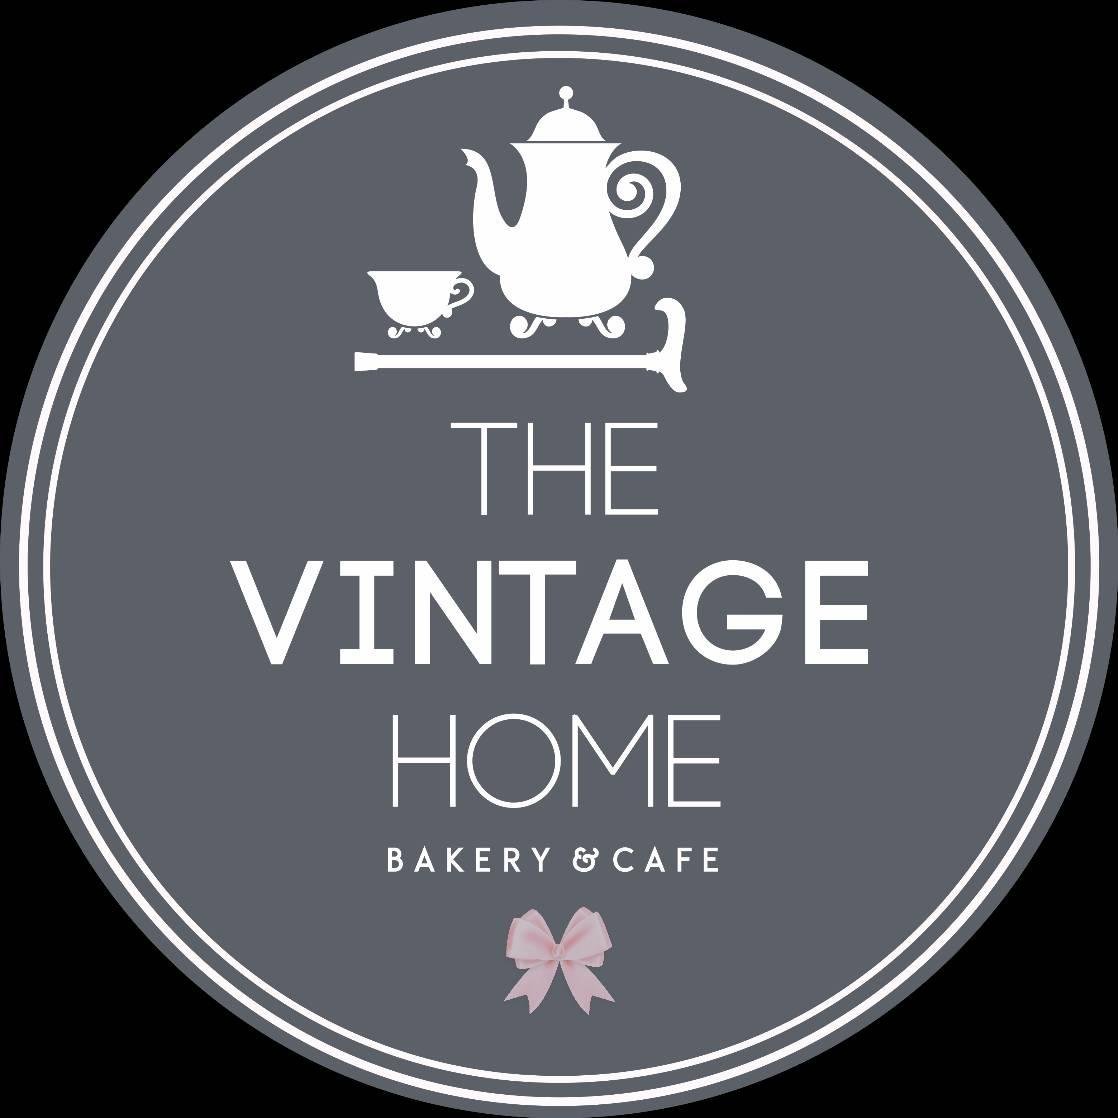 The Vintage Home. "Bakery & Cafe"